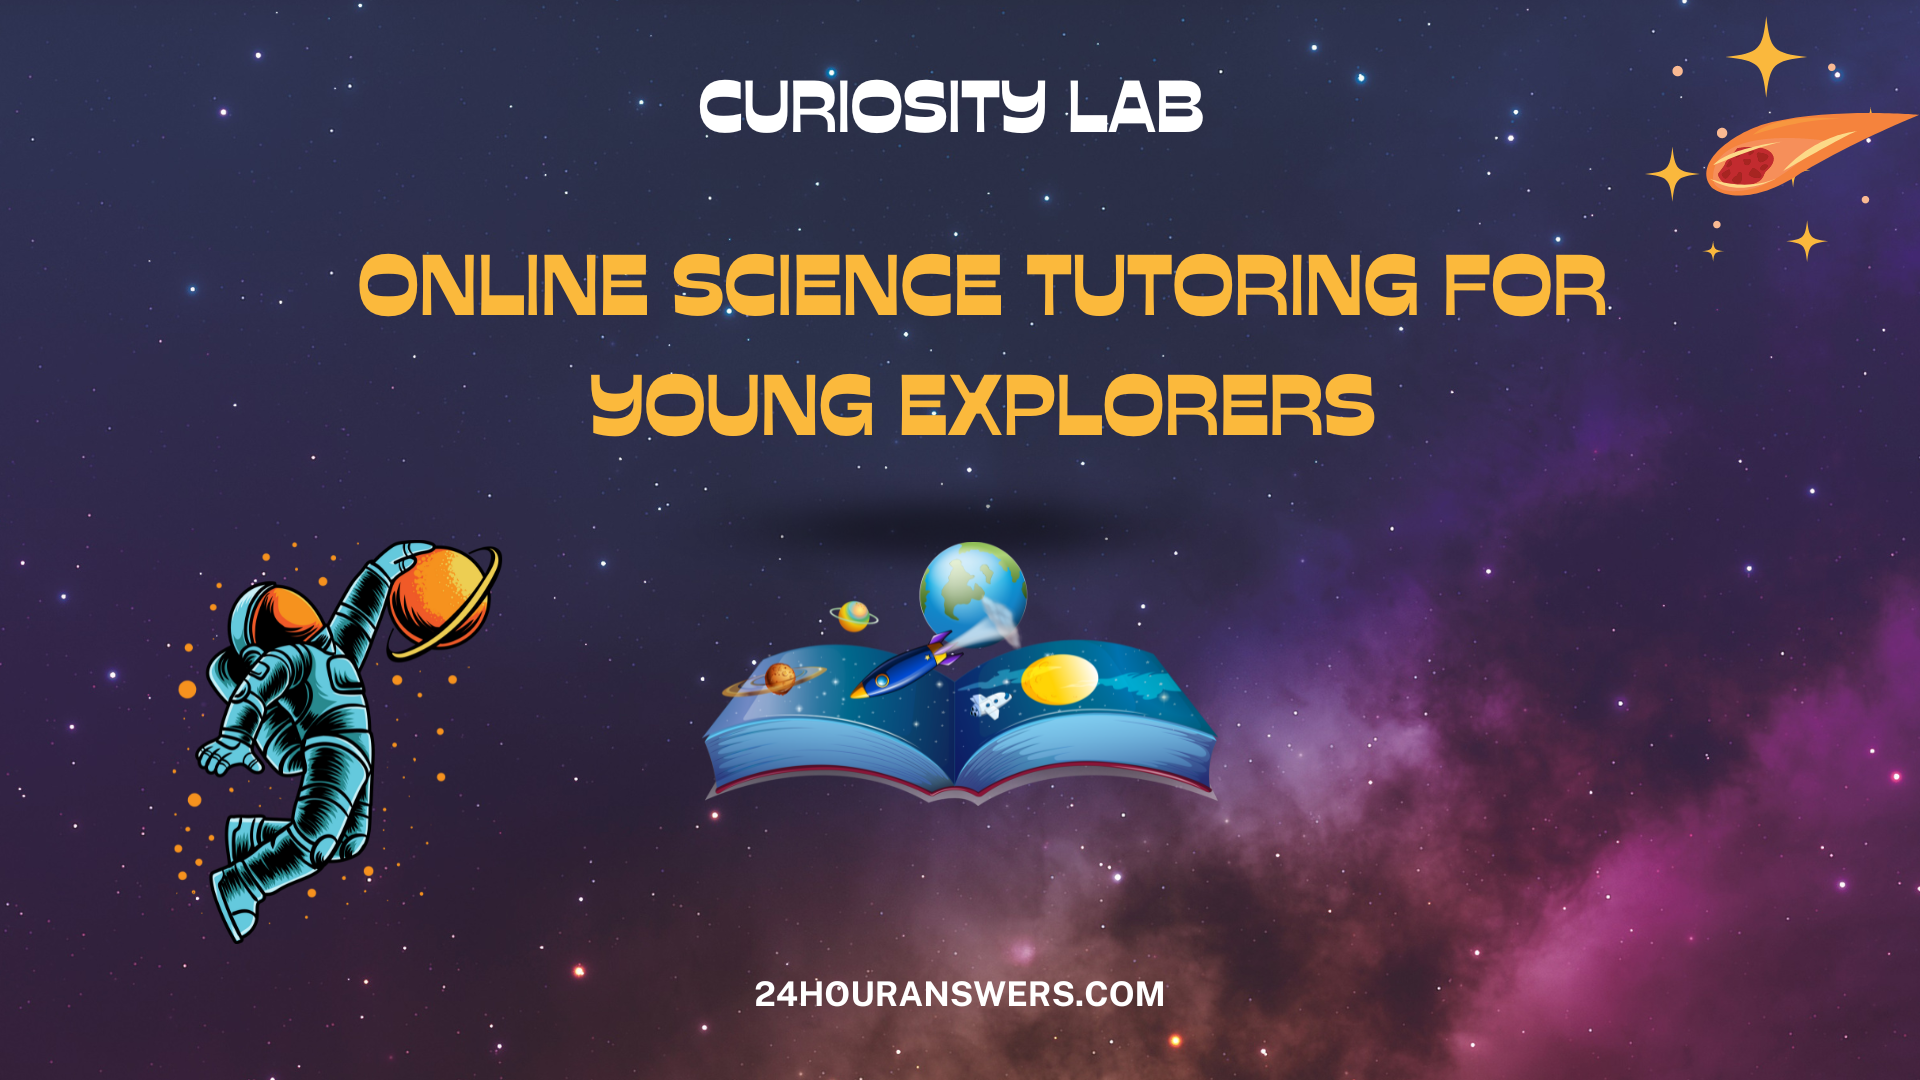 Curiosity Lab: Online Science Tutoring for Young Explorers